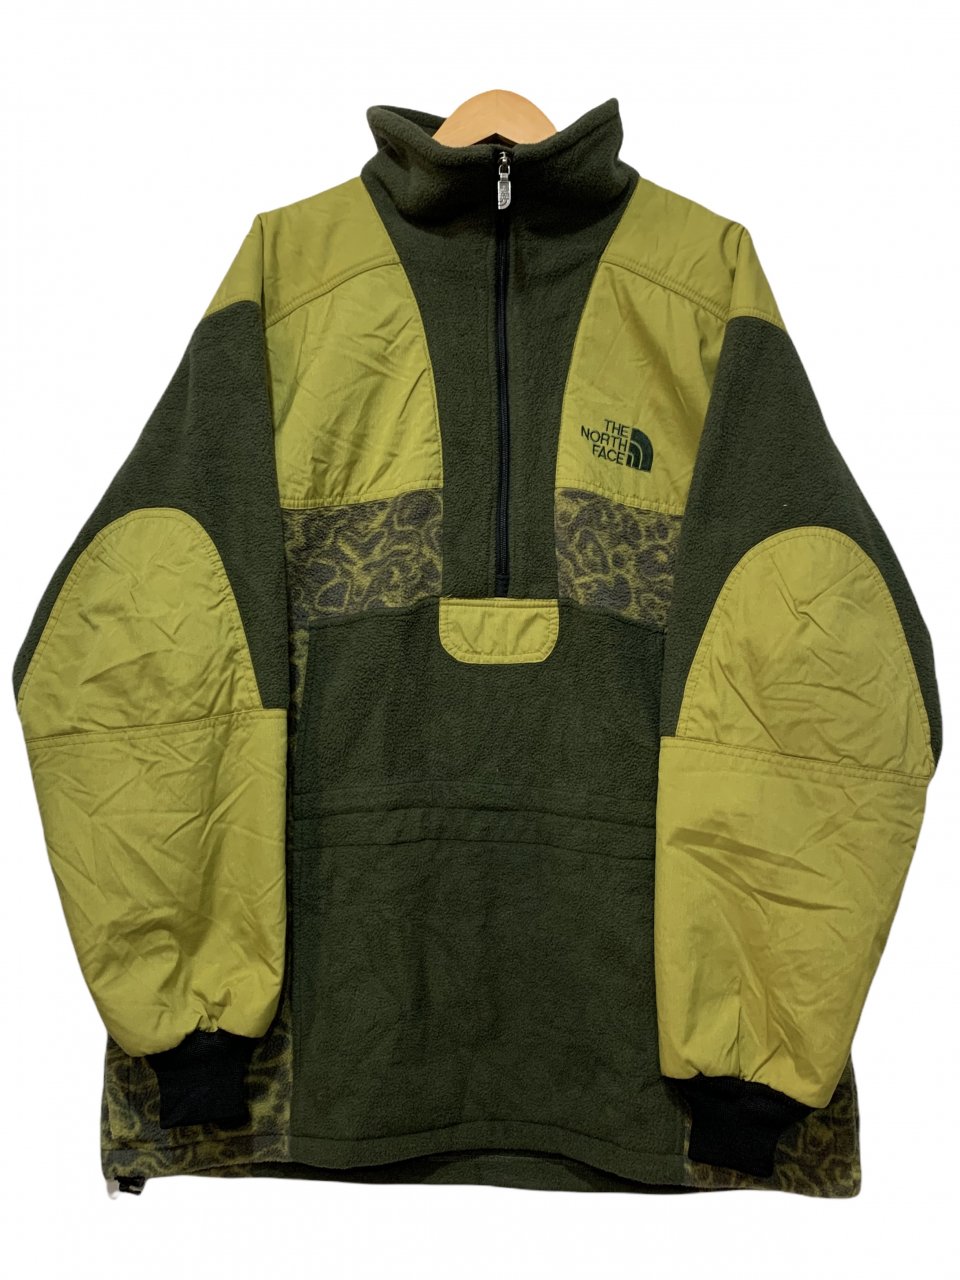 USA製 90s THE NORTH FACE 